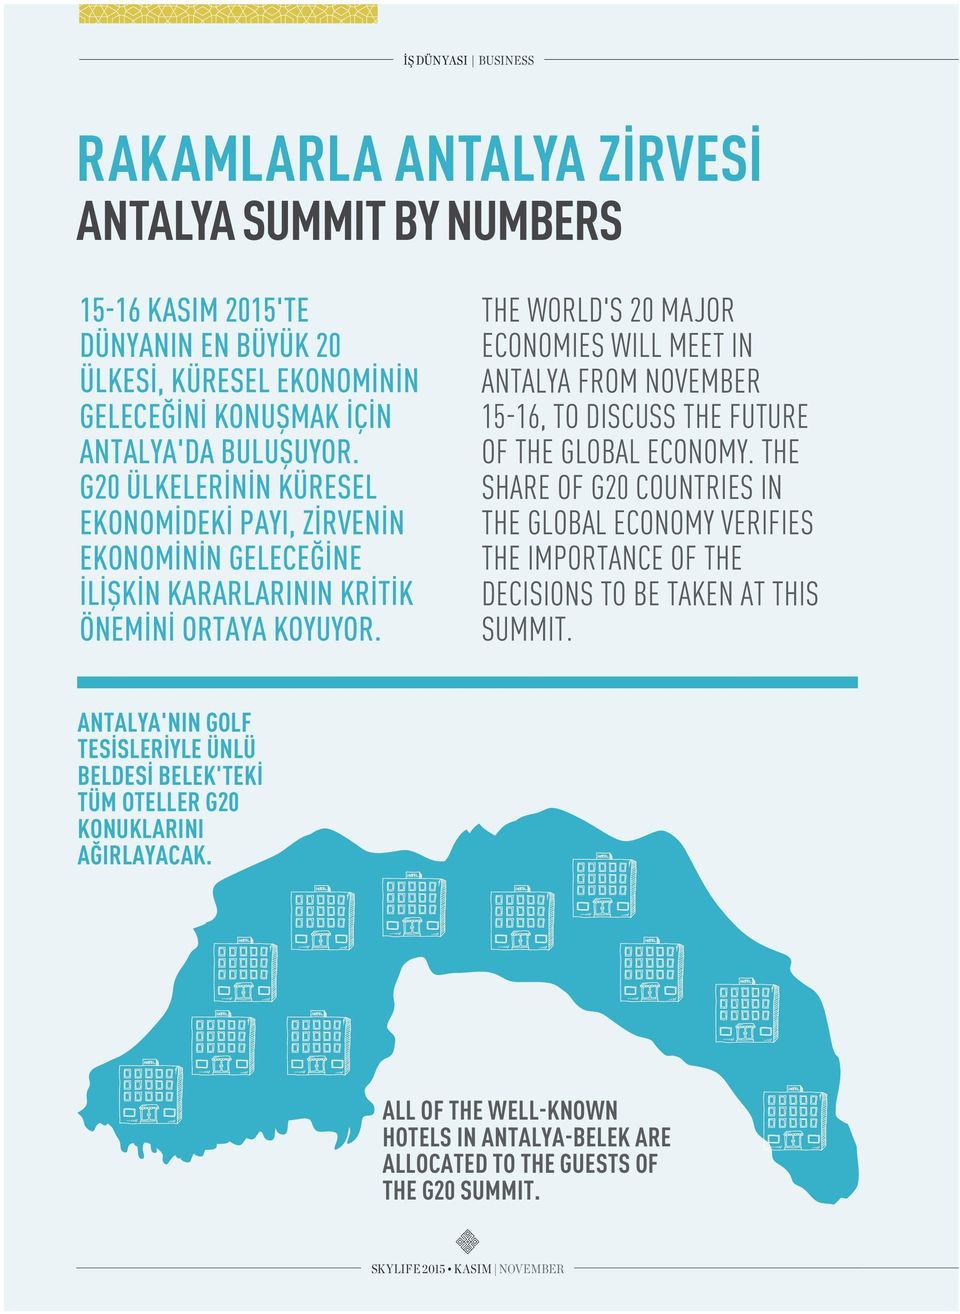 THE WORLD'S 20 MAJOR ECONOMIES WILL MEET IN ANTALYA FROM NOVEMBER 15-16, TO DISCUSS THE FUTURE OF THE GLOBAL ECONOMY.